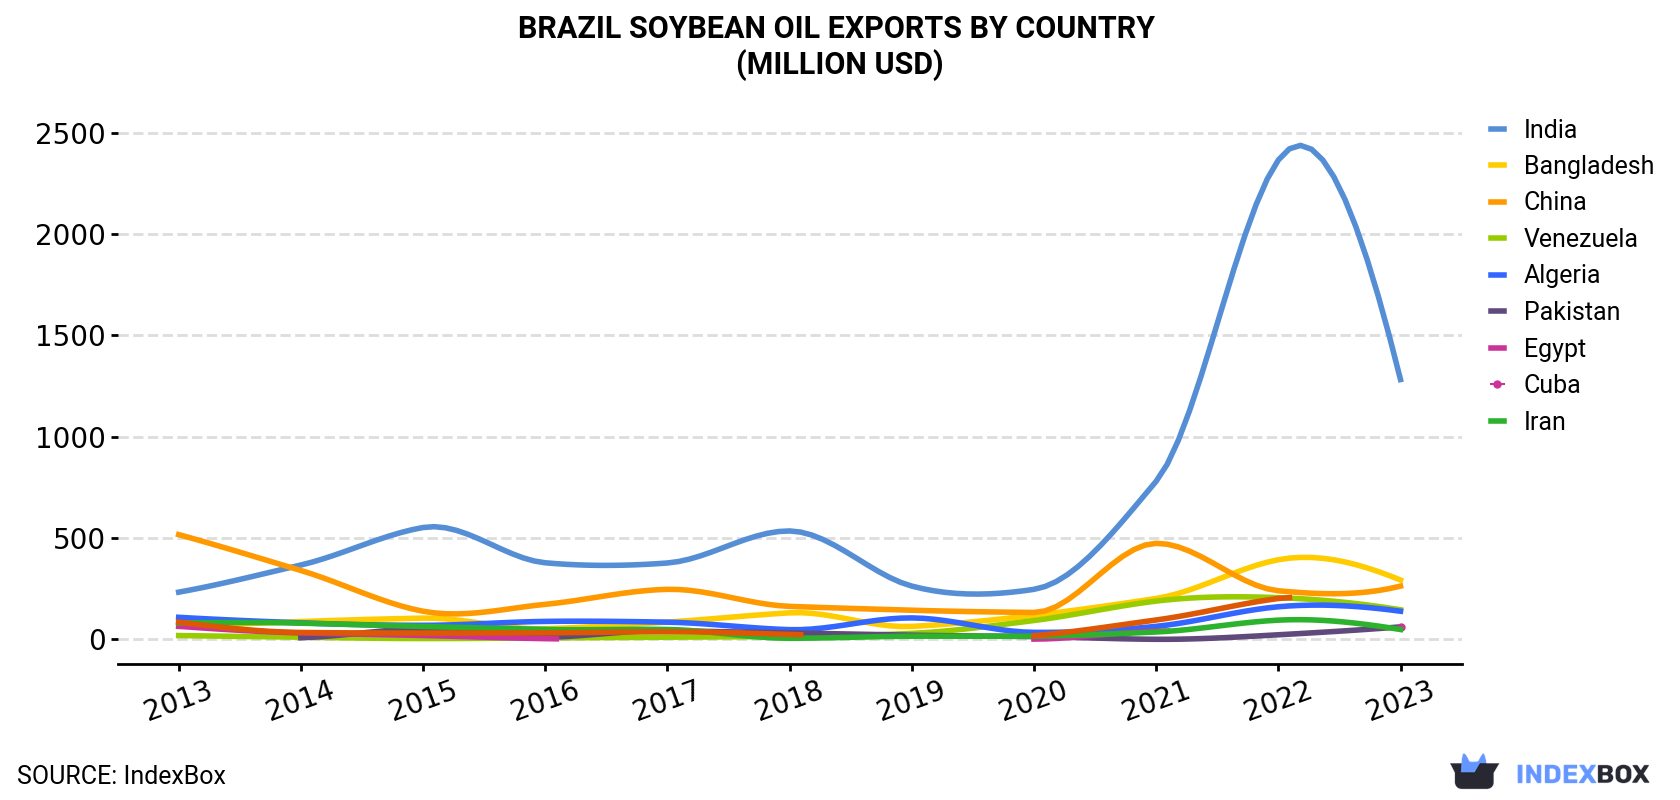 Brazil Soybean Oil Exports By Country (Million USD)